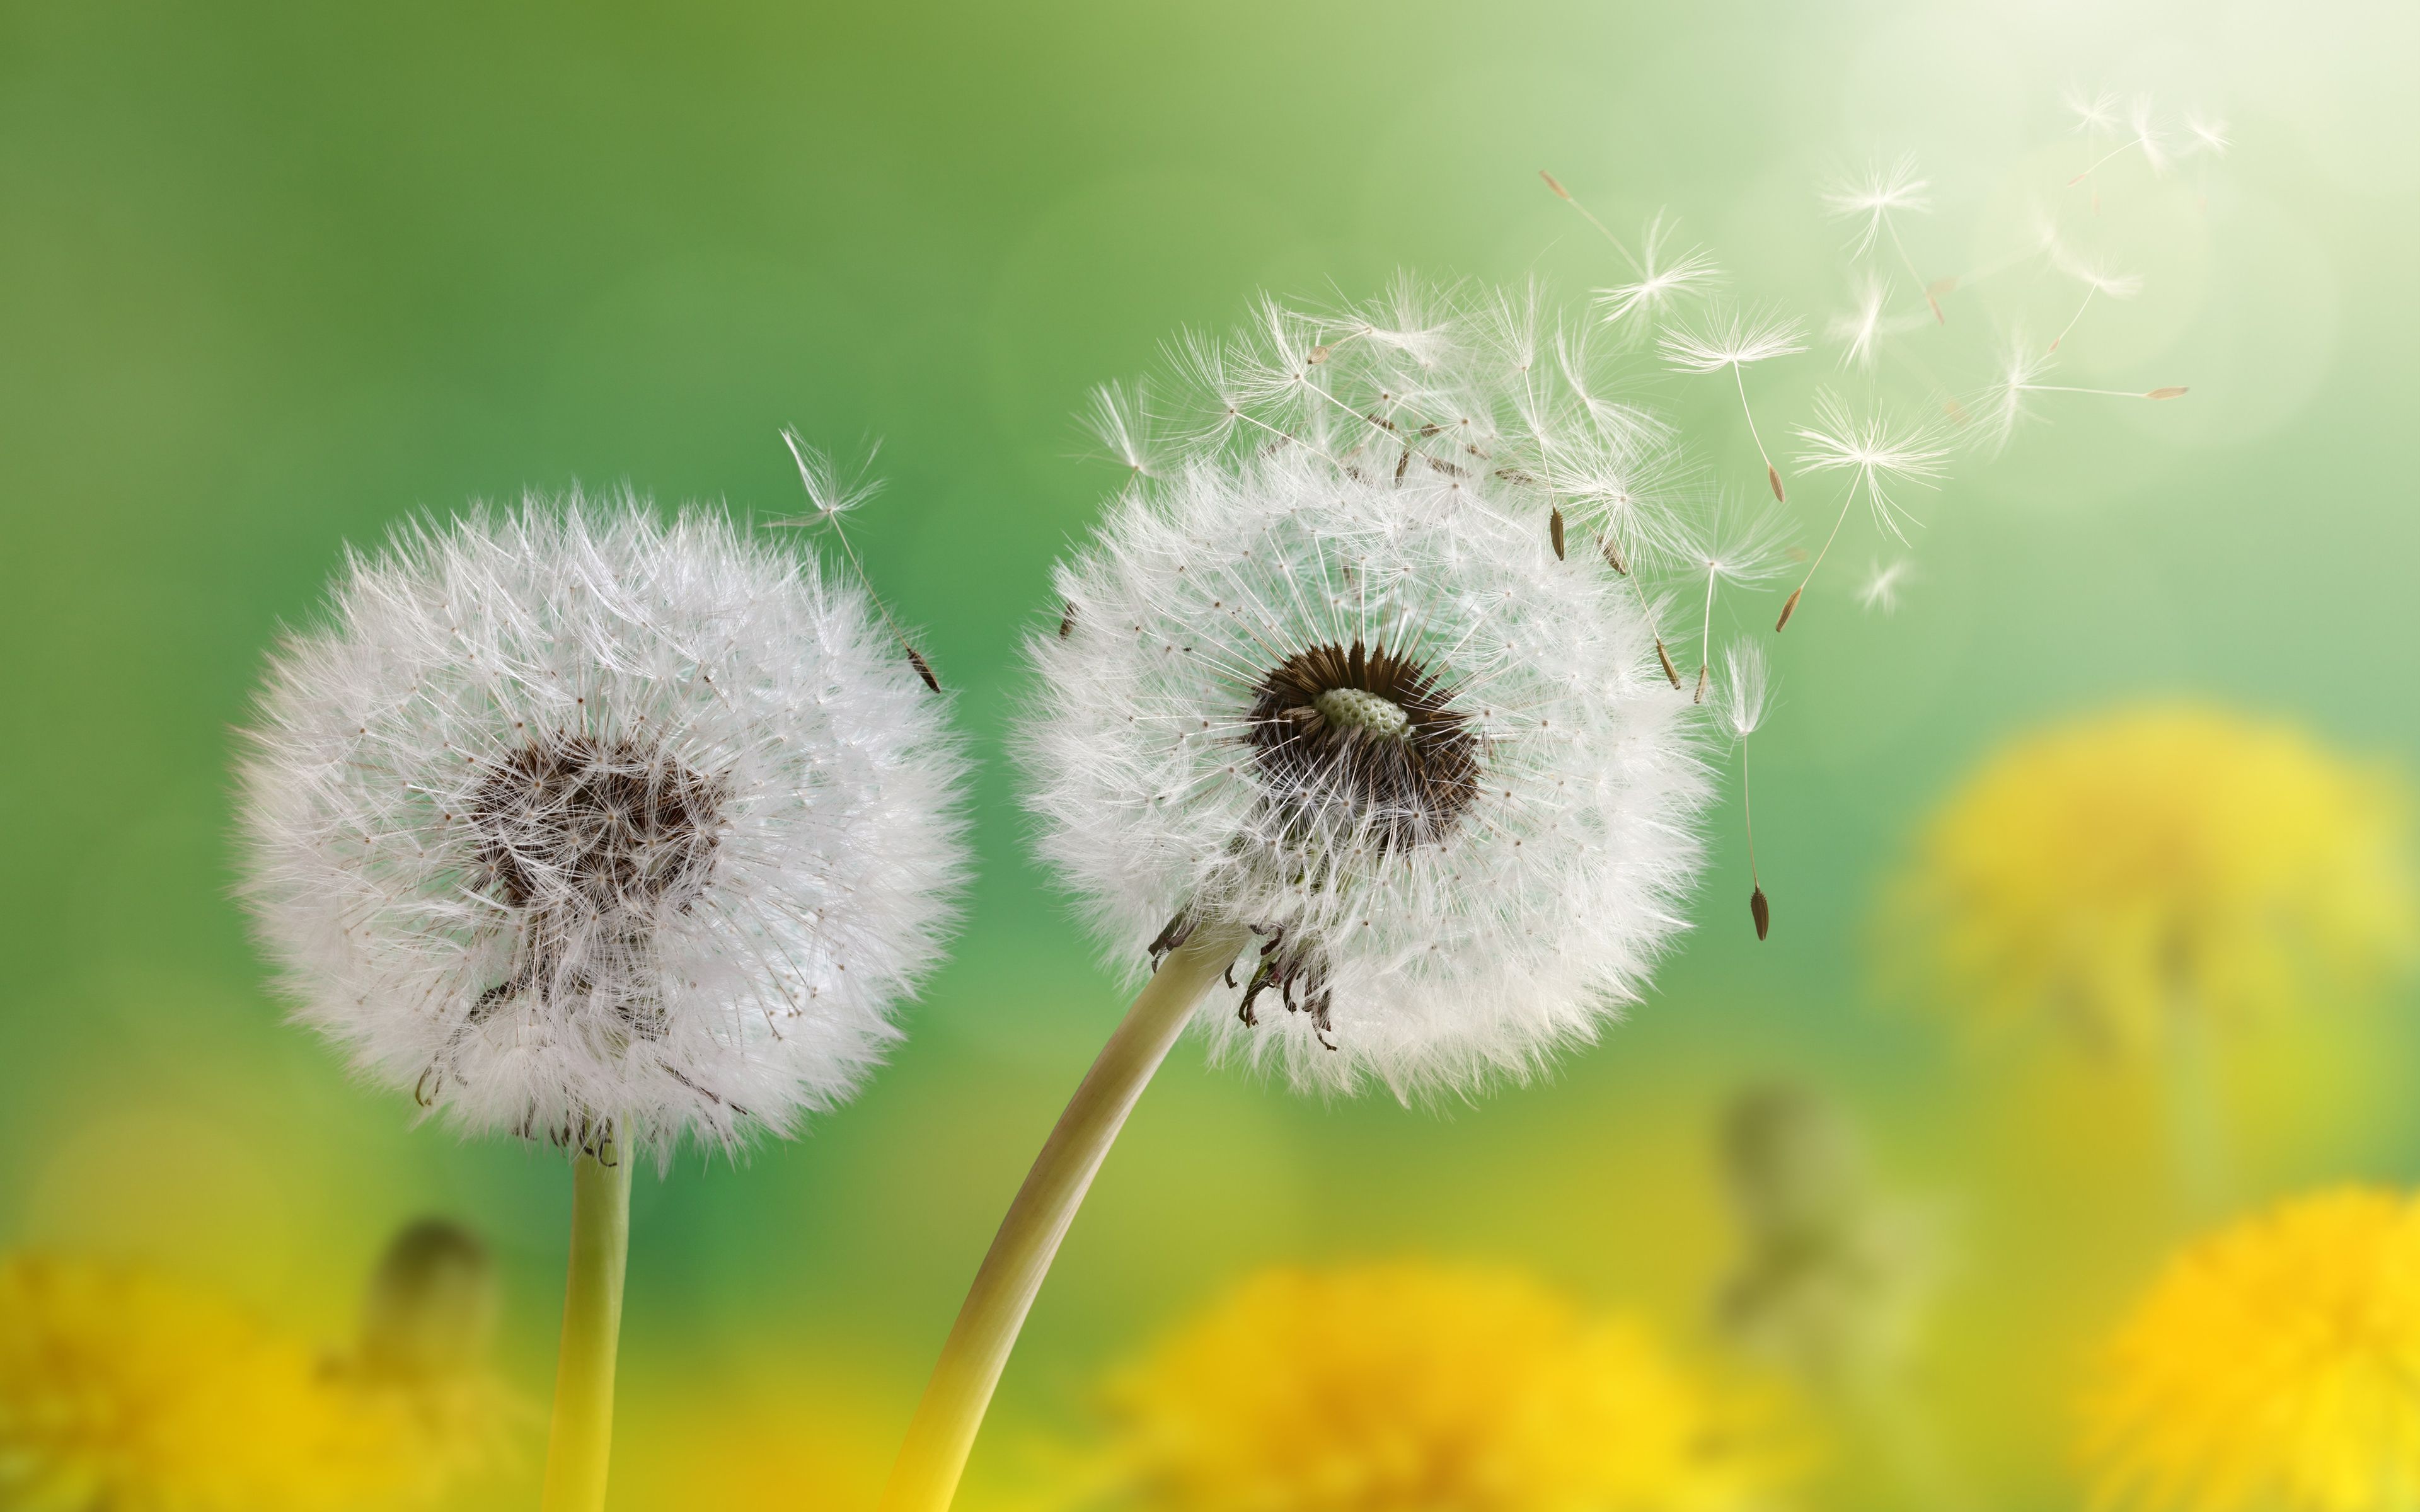 Dandelion 4K wallpaper for your desktop or mobile screen free and easy to download